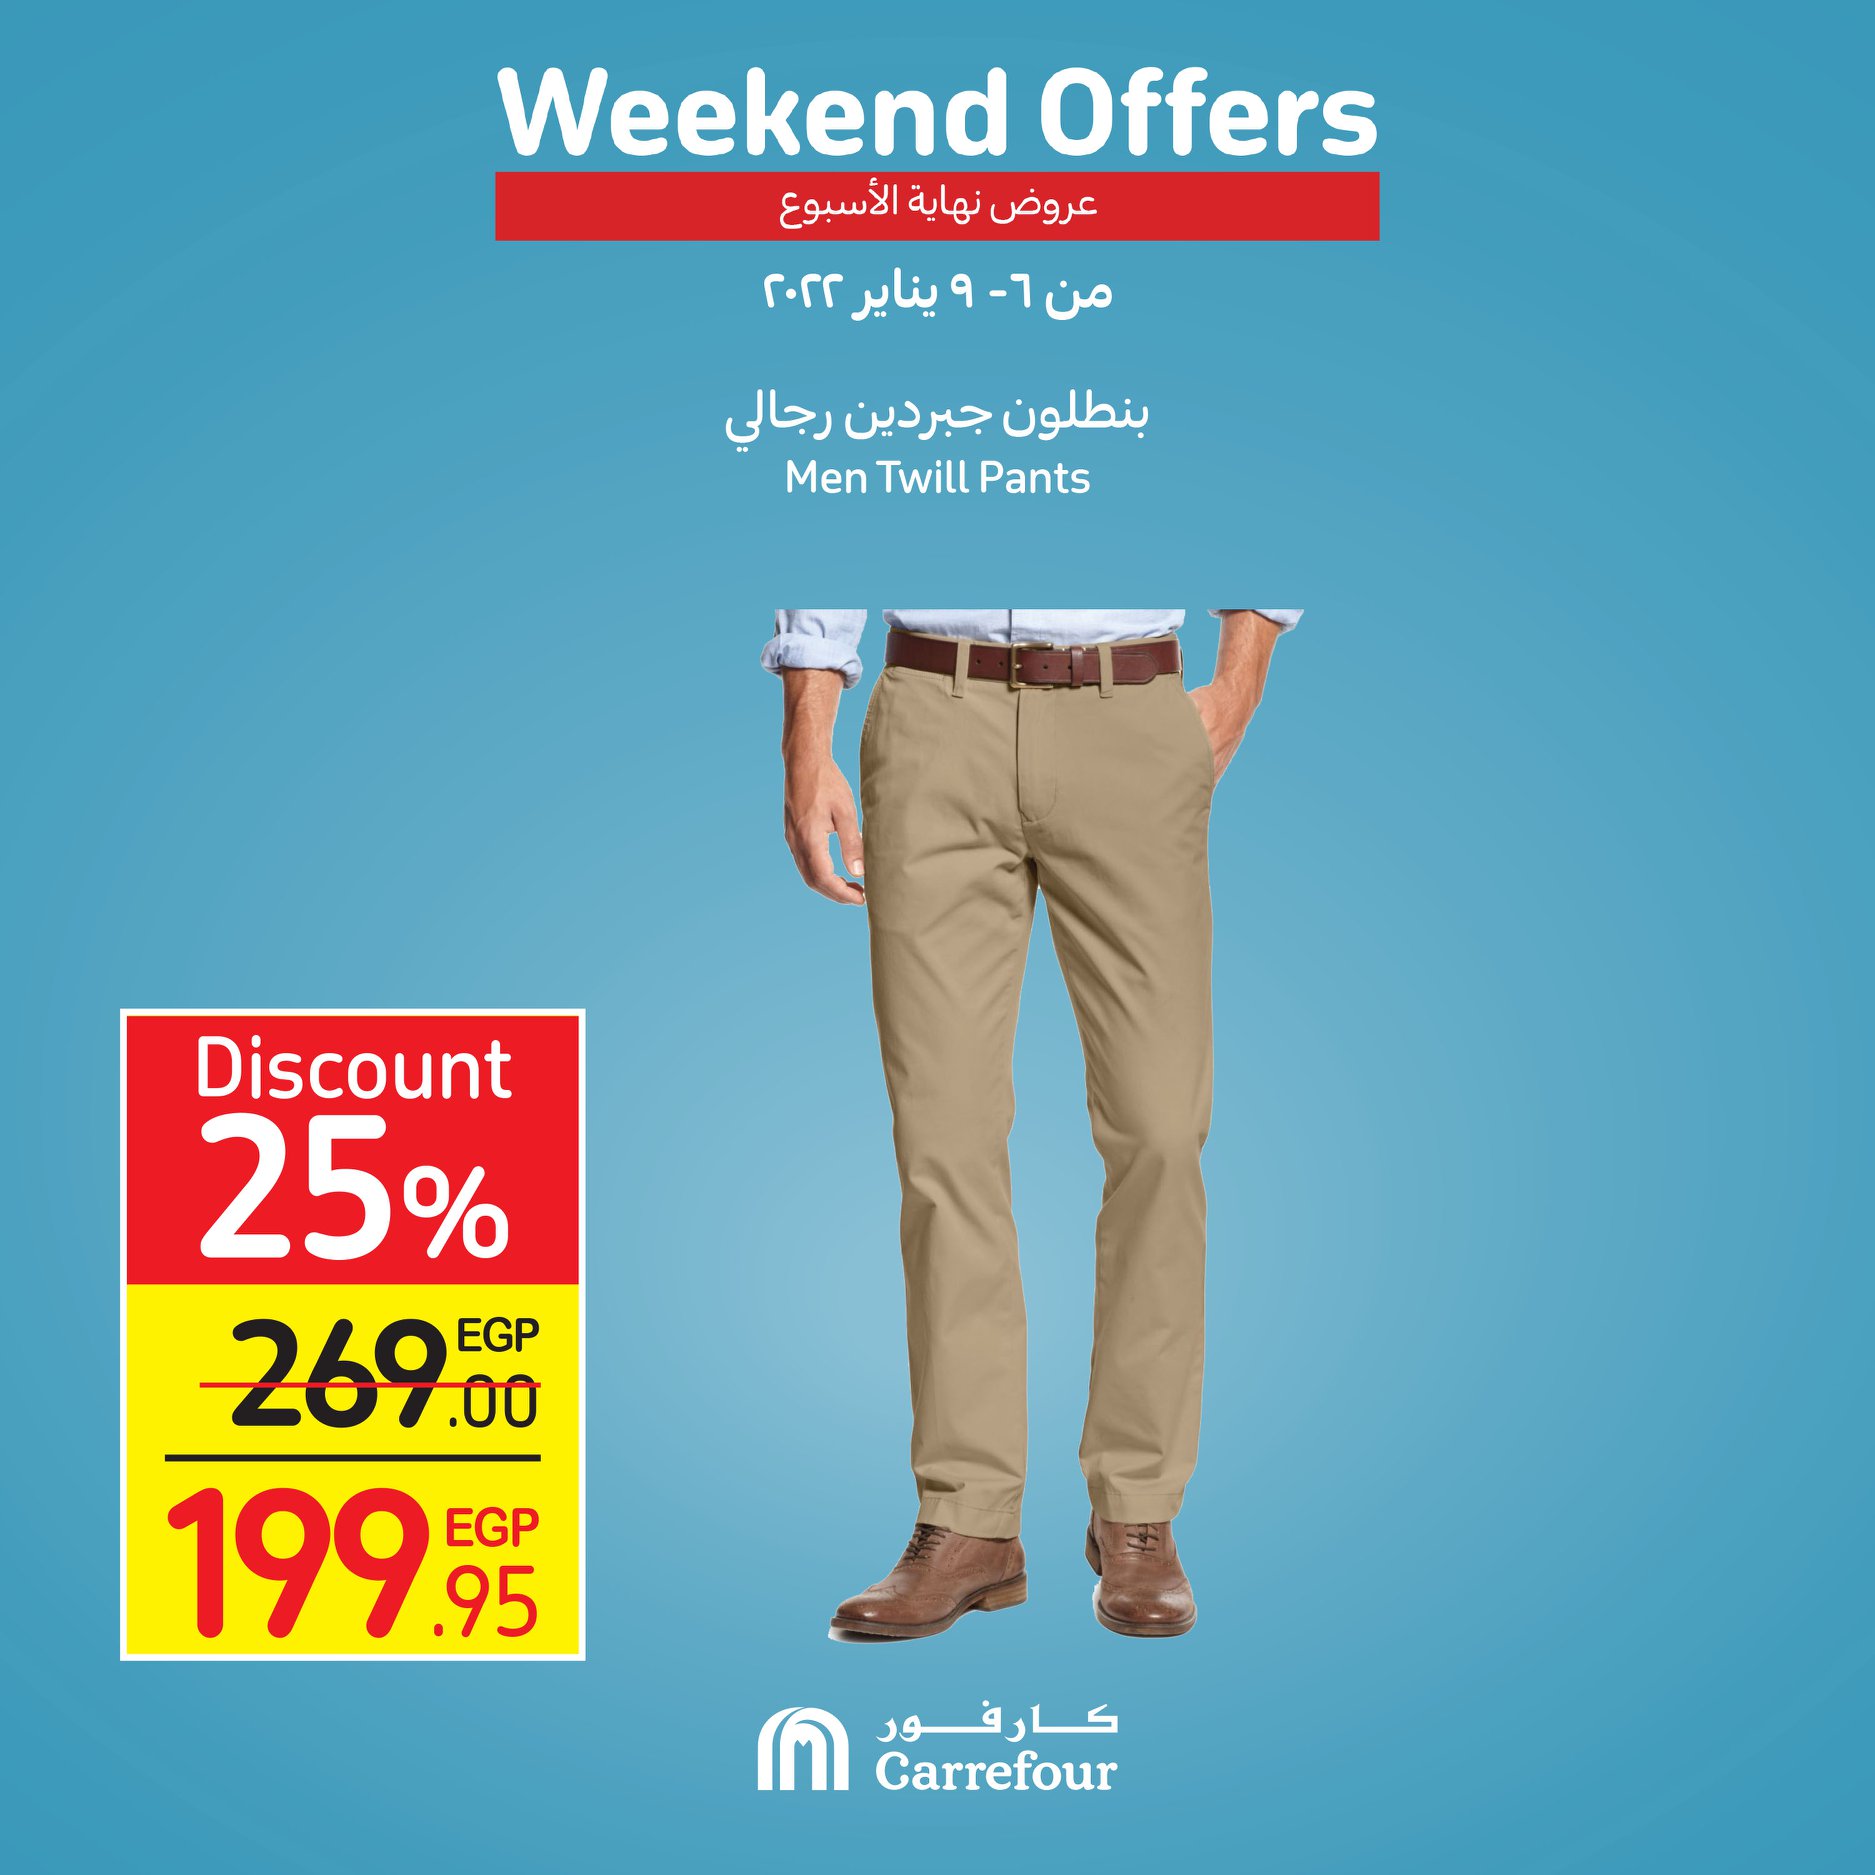 Now, the strongest Carrefour offers and surprises, half-price discounts, at Weekend until January 16th, 43